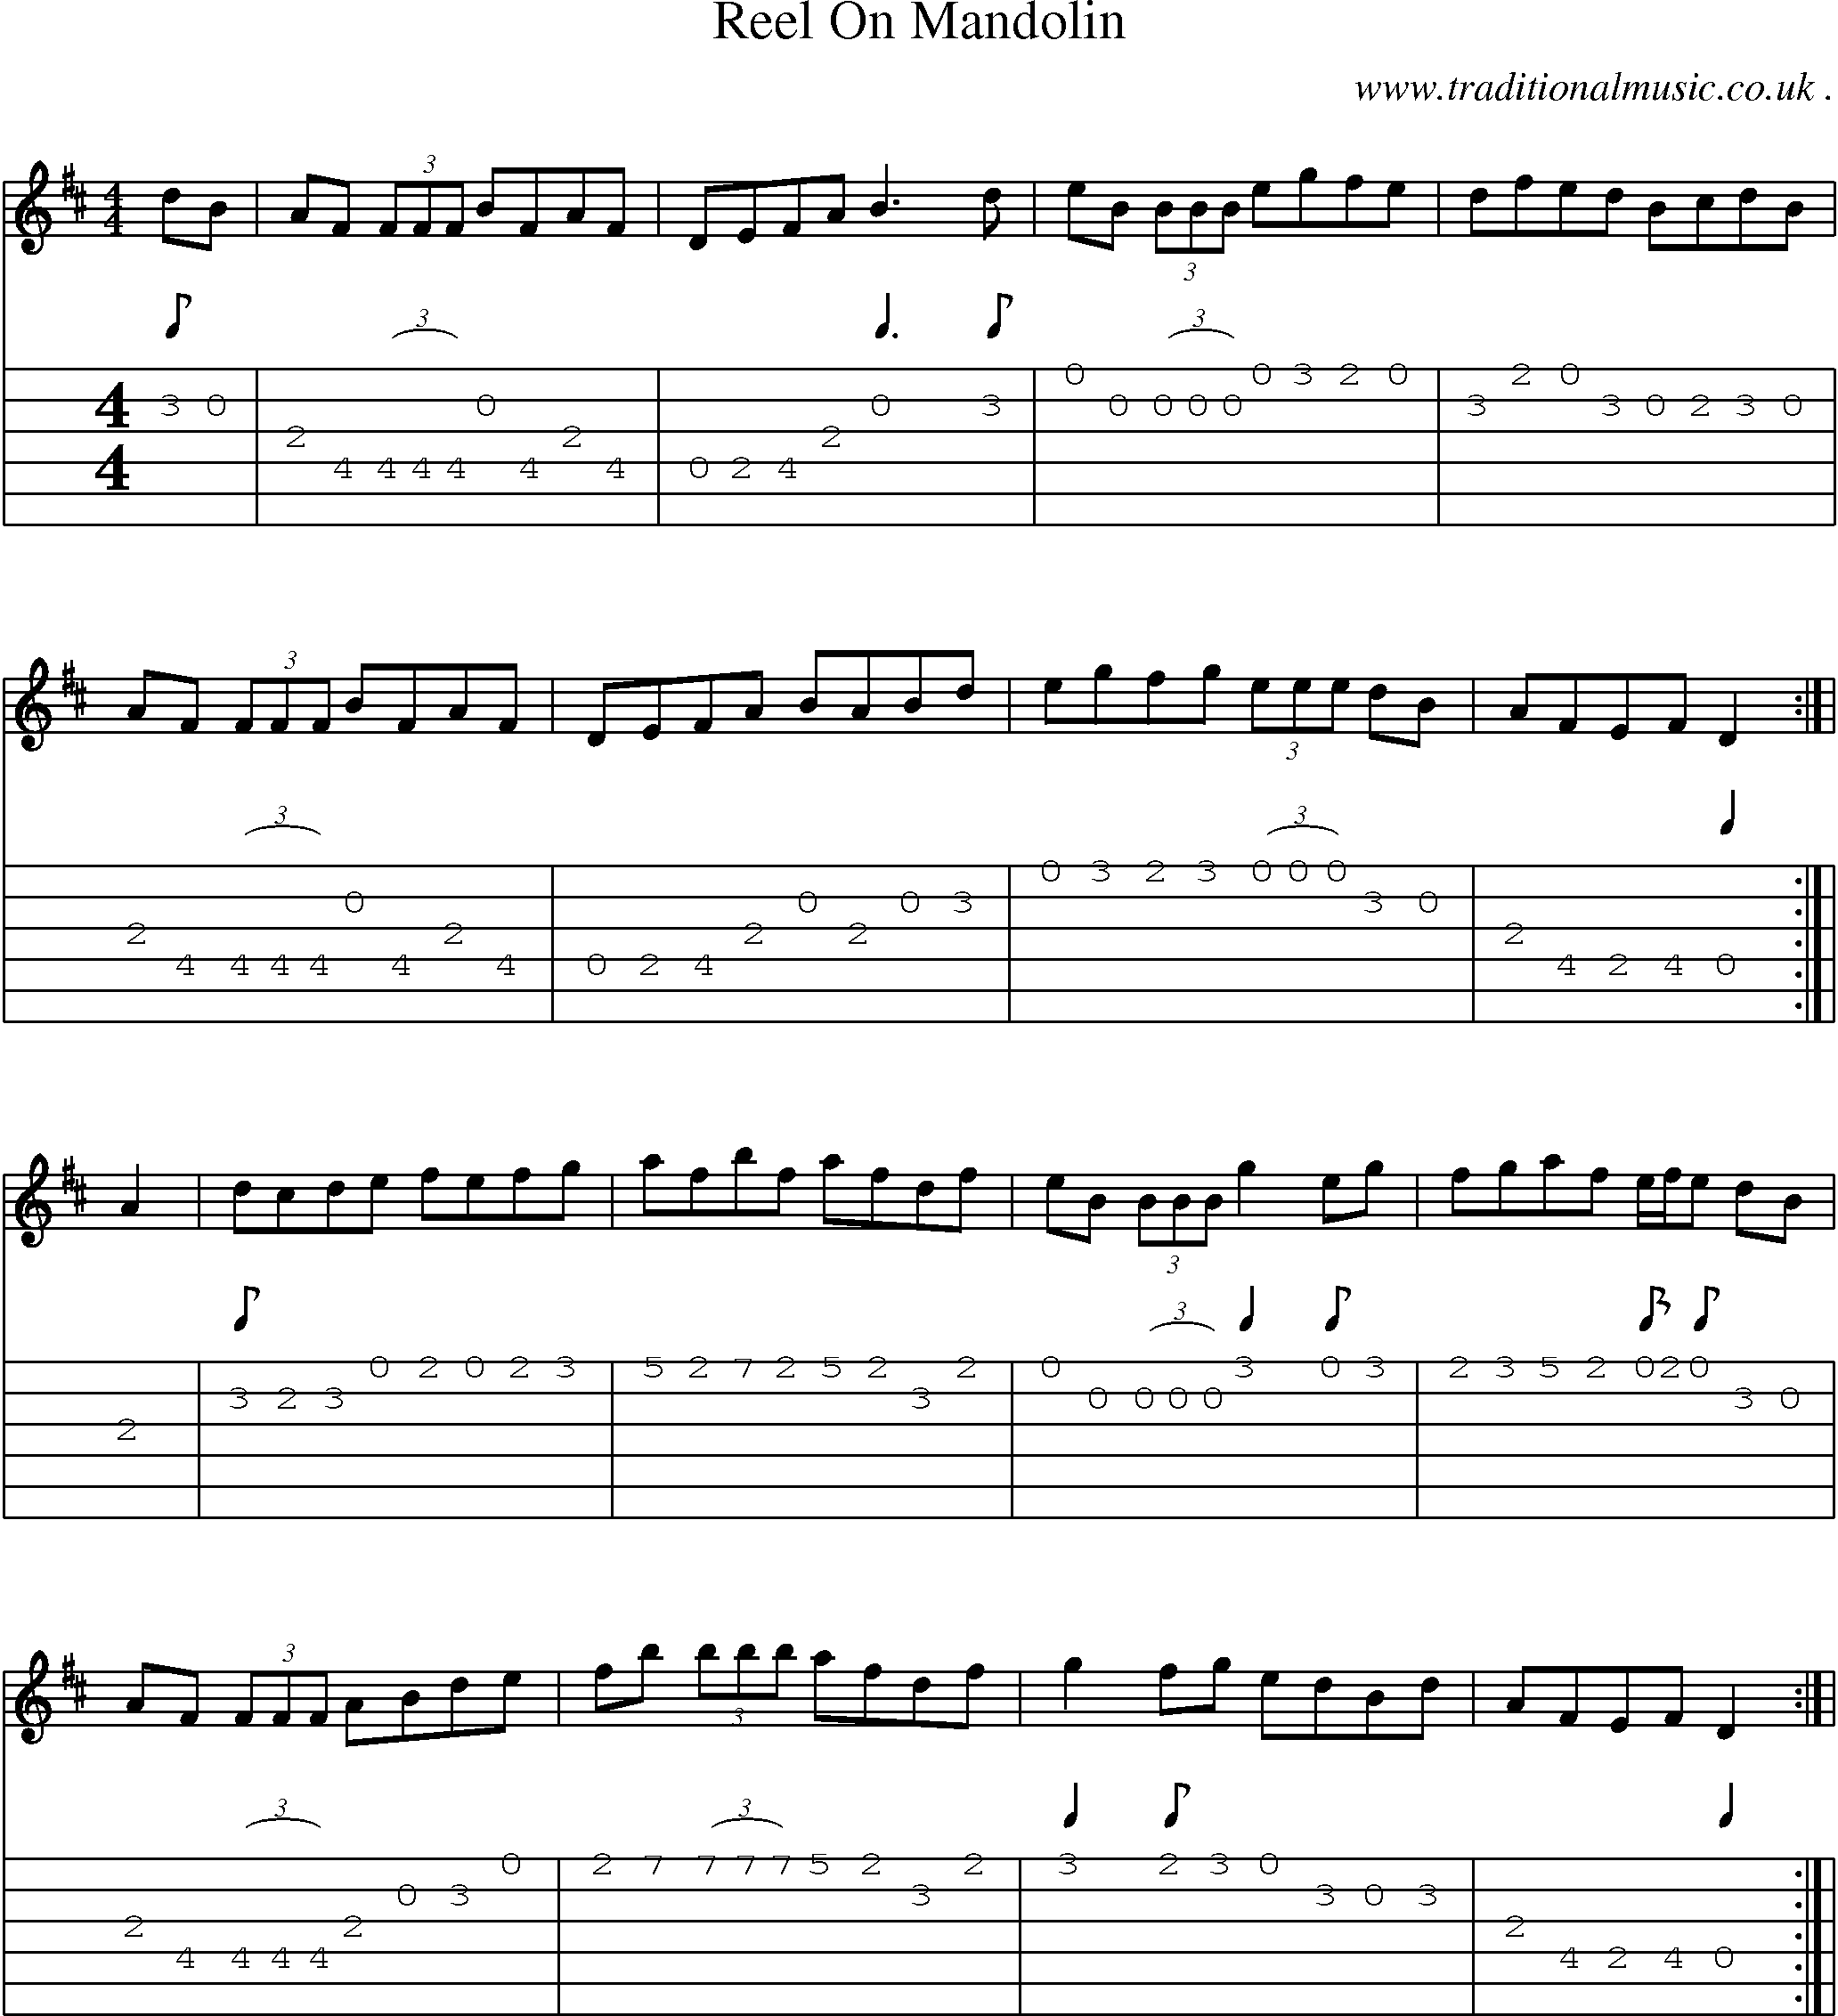 Sheet-Music and Guitar Tabs for Reel On Mandolin